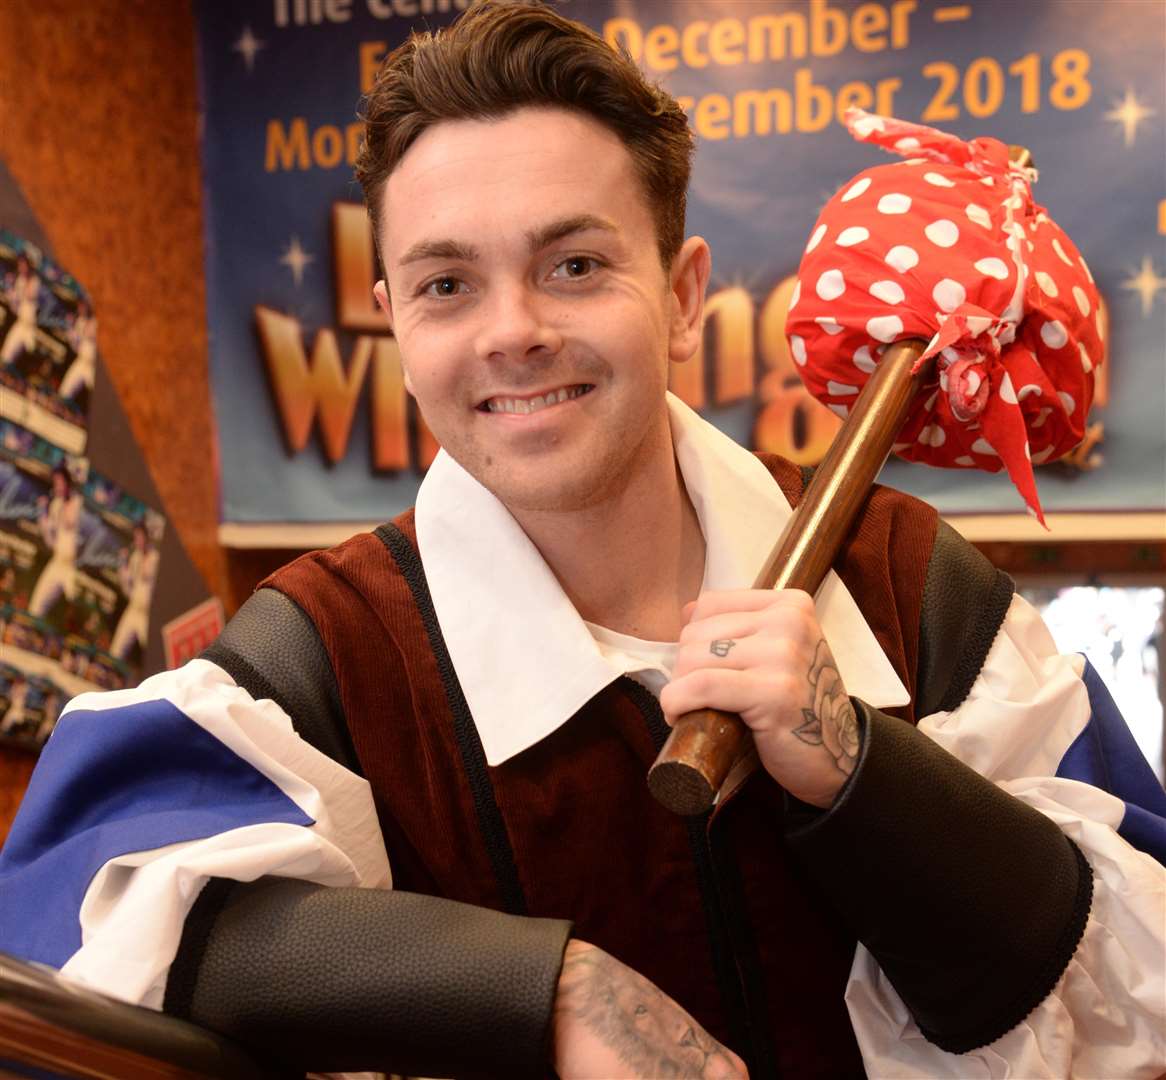 Ray Quinn will be playing Dick Whittington at the Central Theatre, Chatham